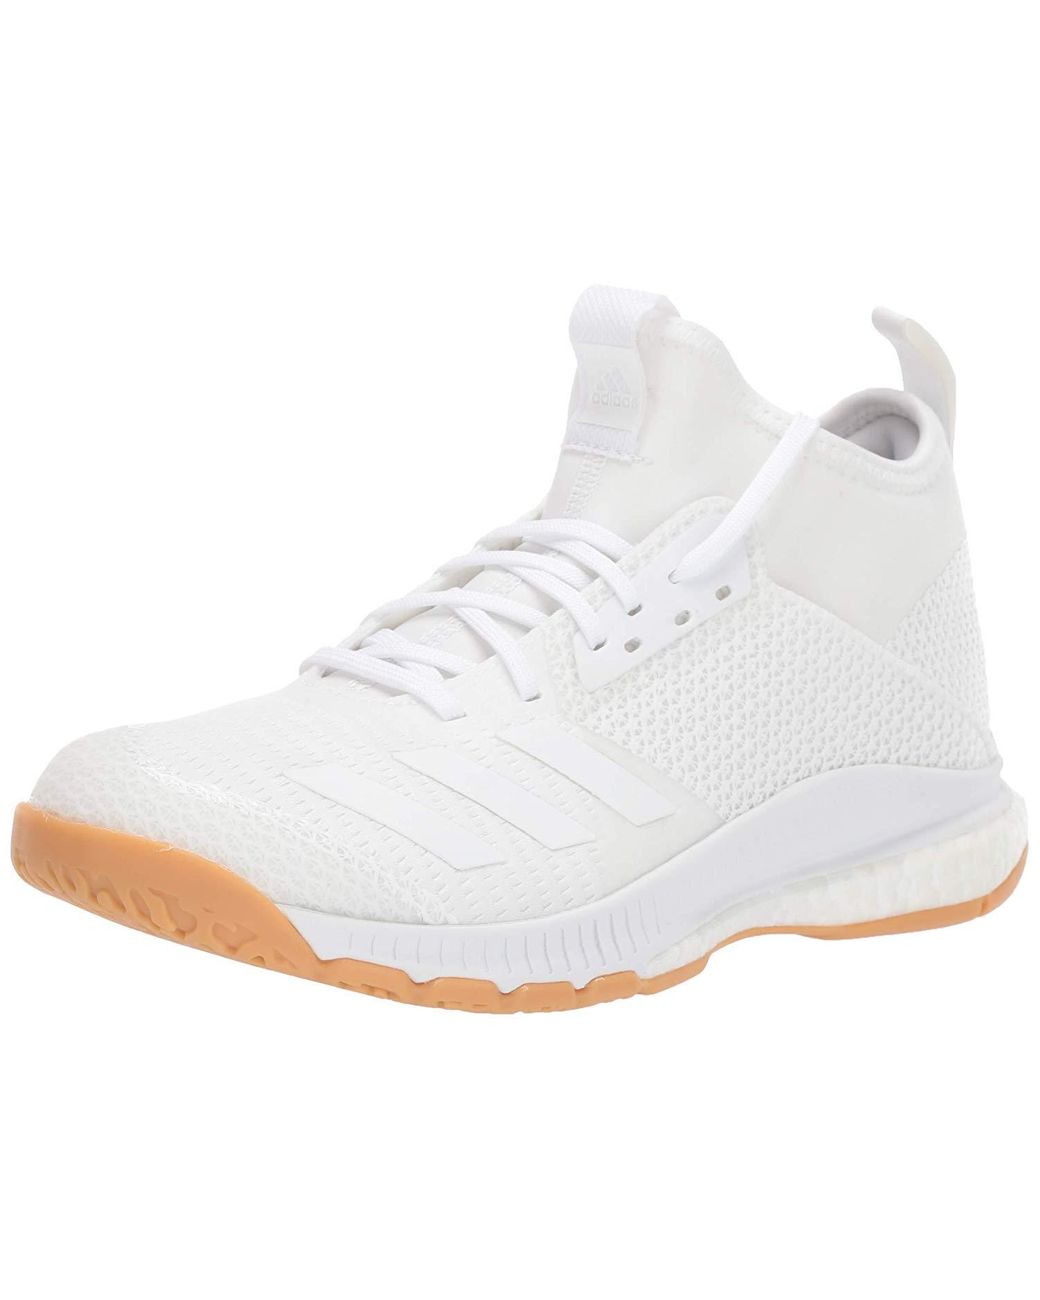 adidas Crazyflight X 3 Mid Volleyball Shoe in White | Lyst